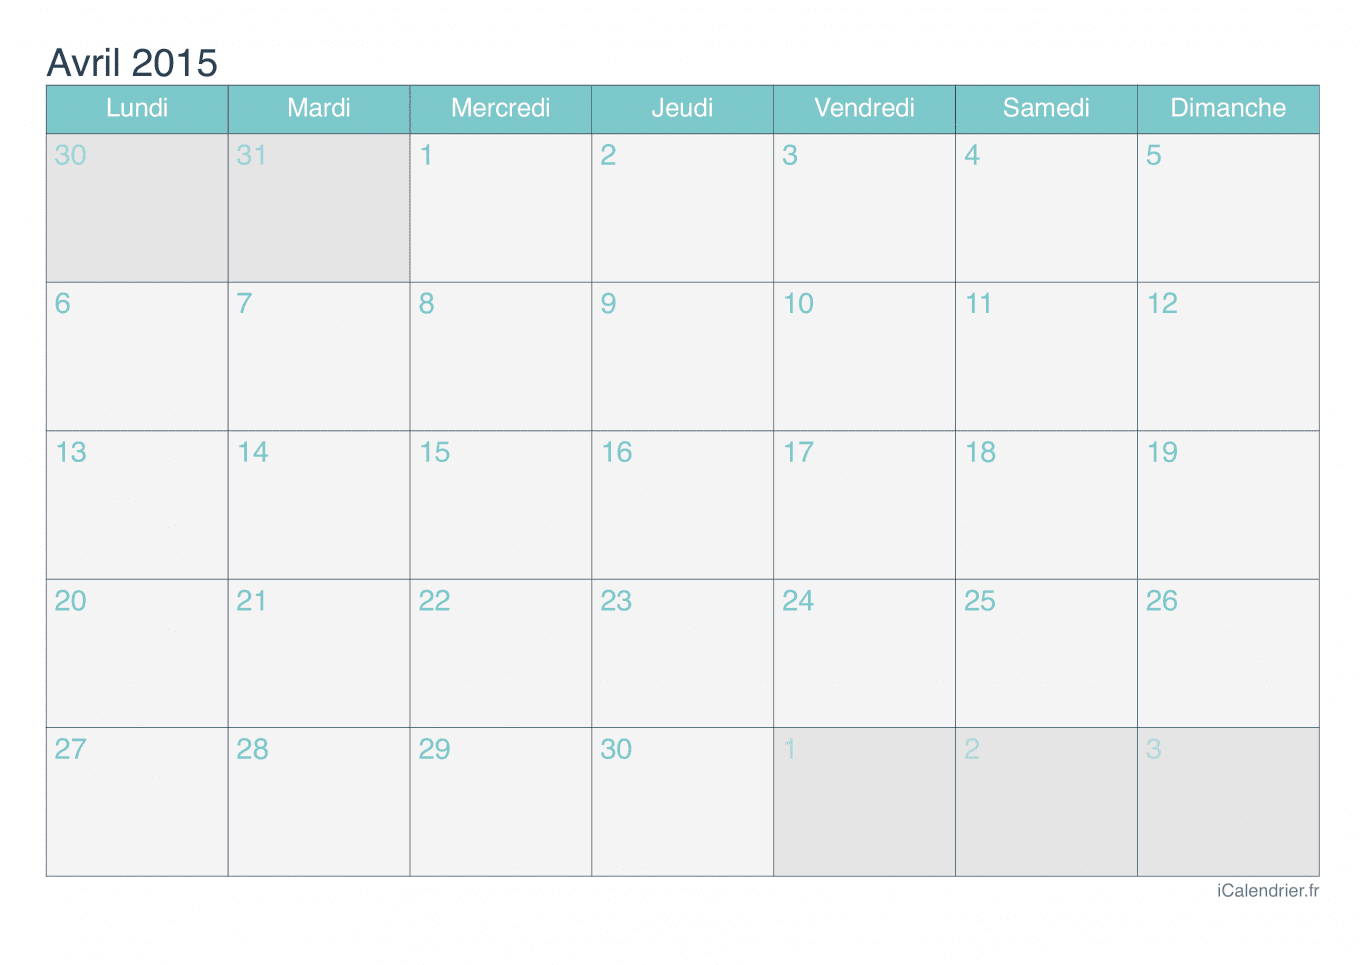 Calendrier d'avril 2015 - Turquoise